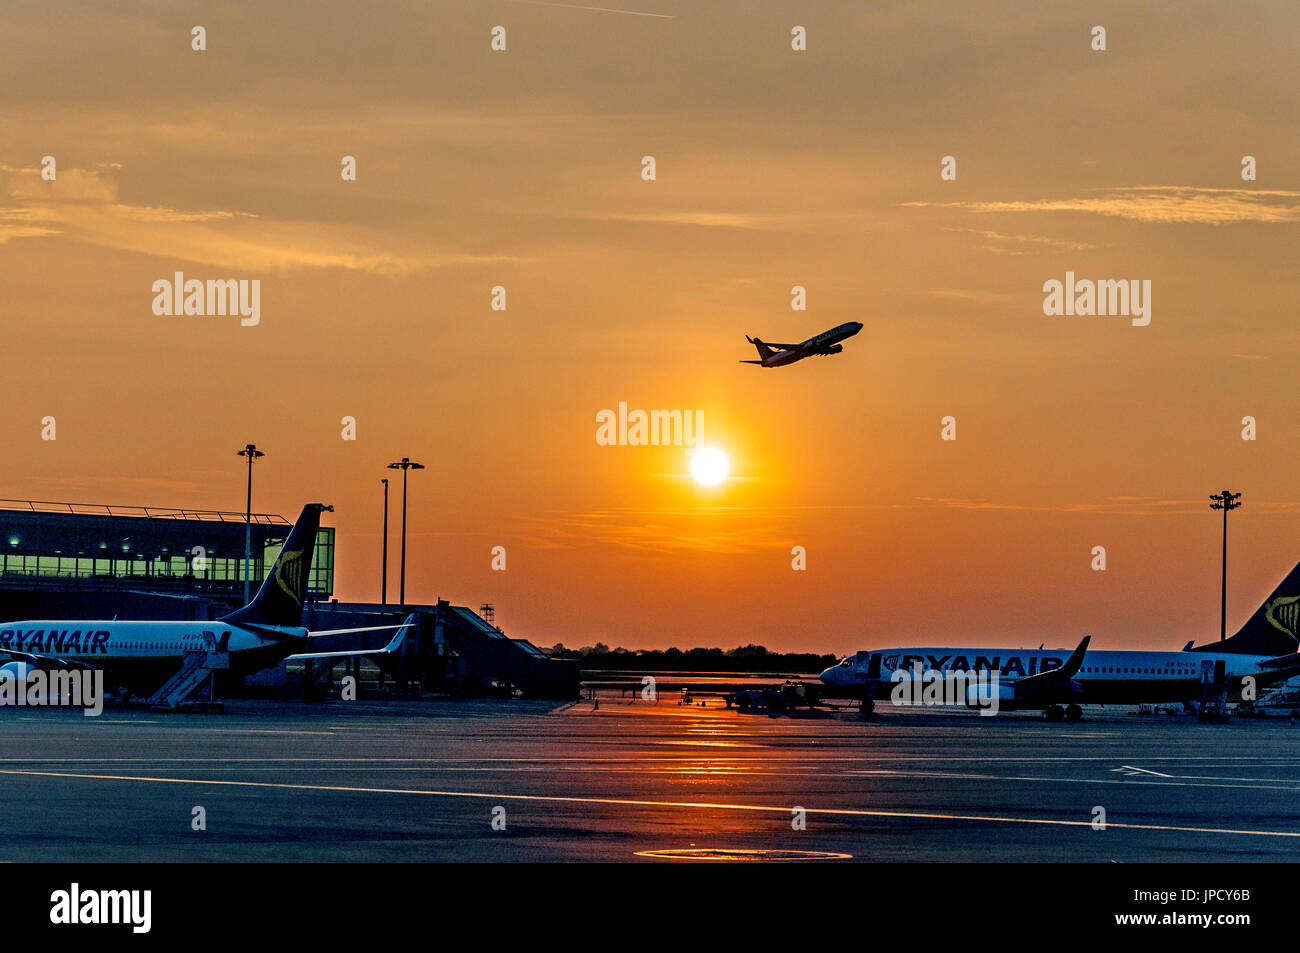 London Stansted Airport aircraft taking off at sunset. Stock Photo